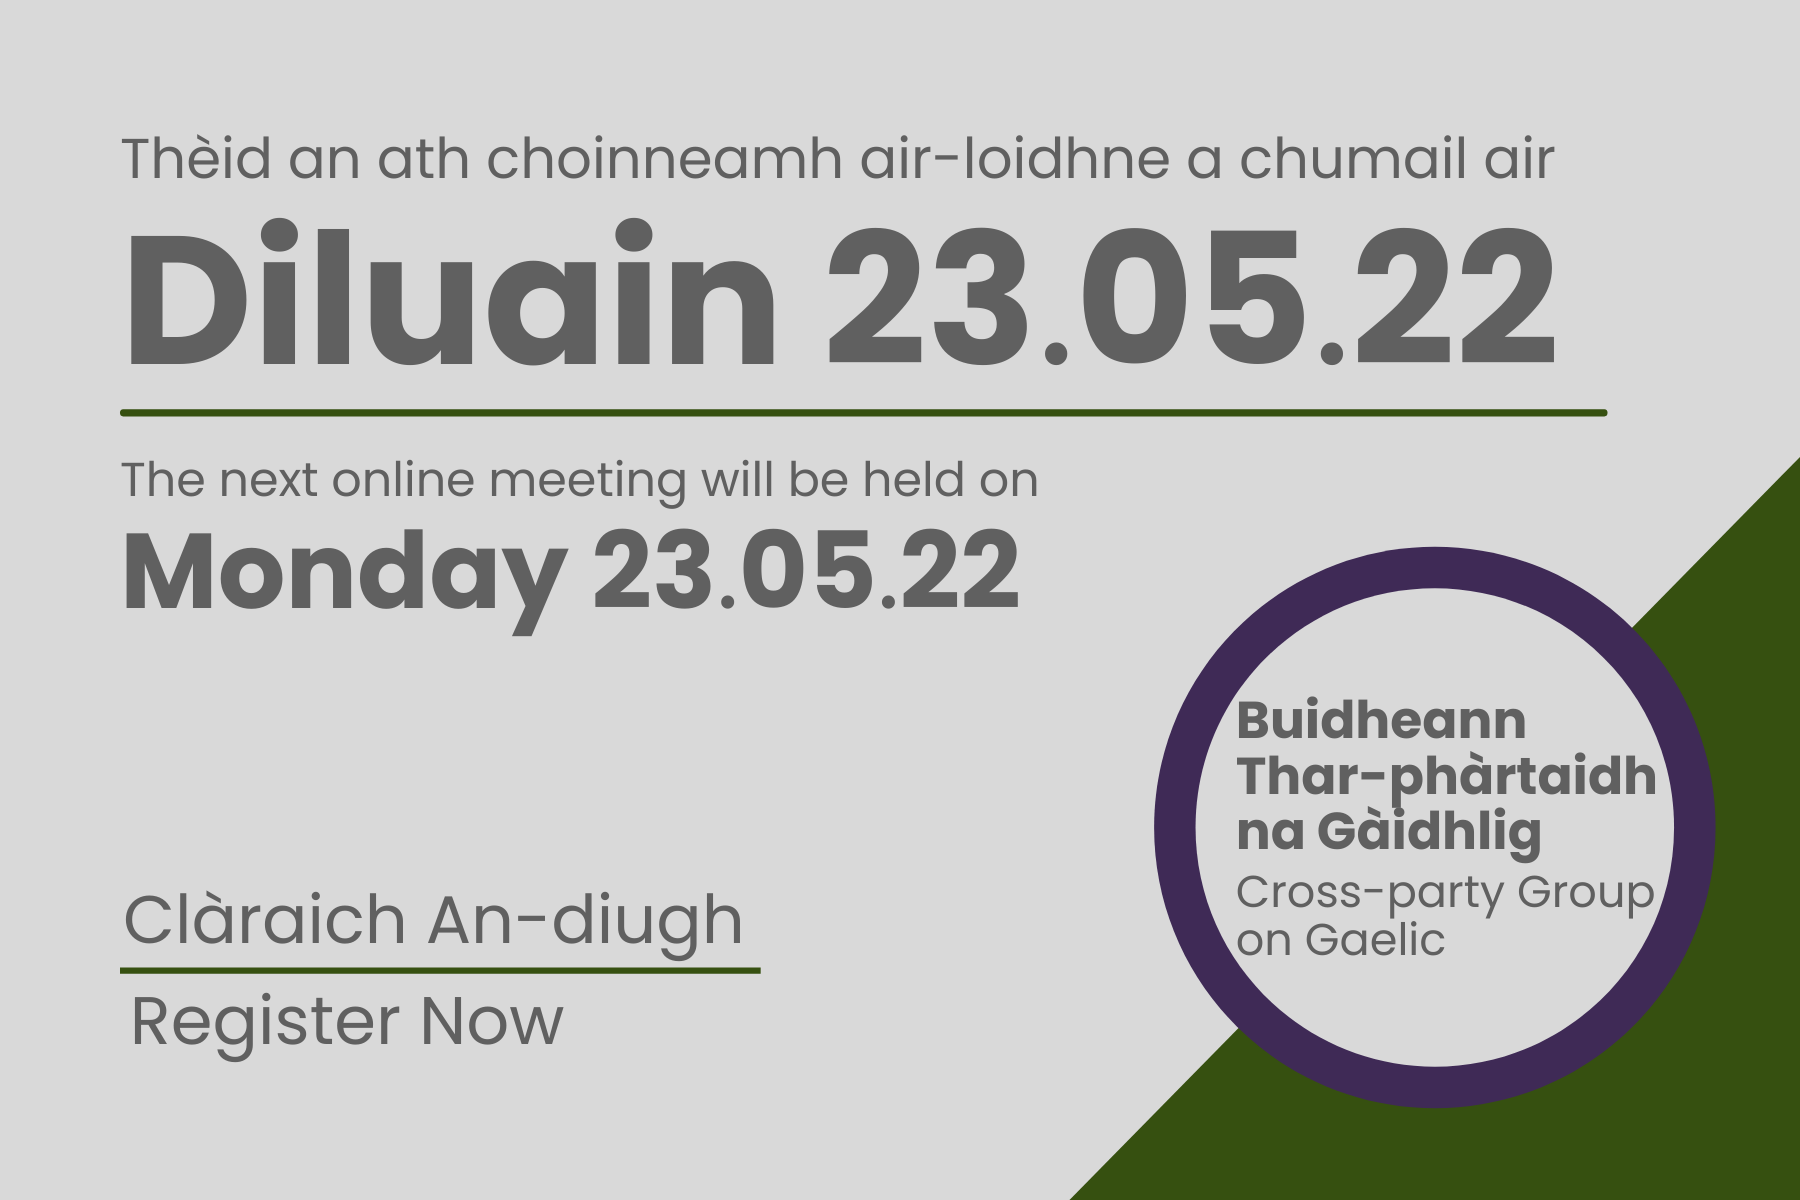 Cross-party Group on Gaelic